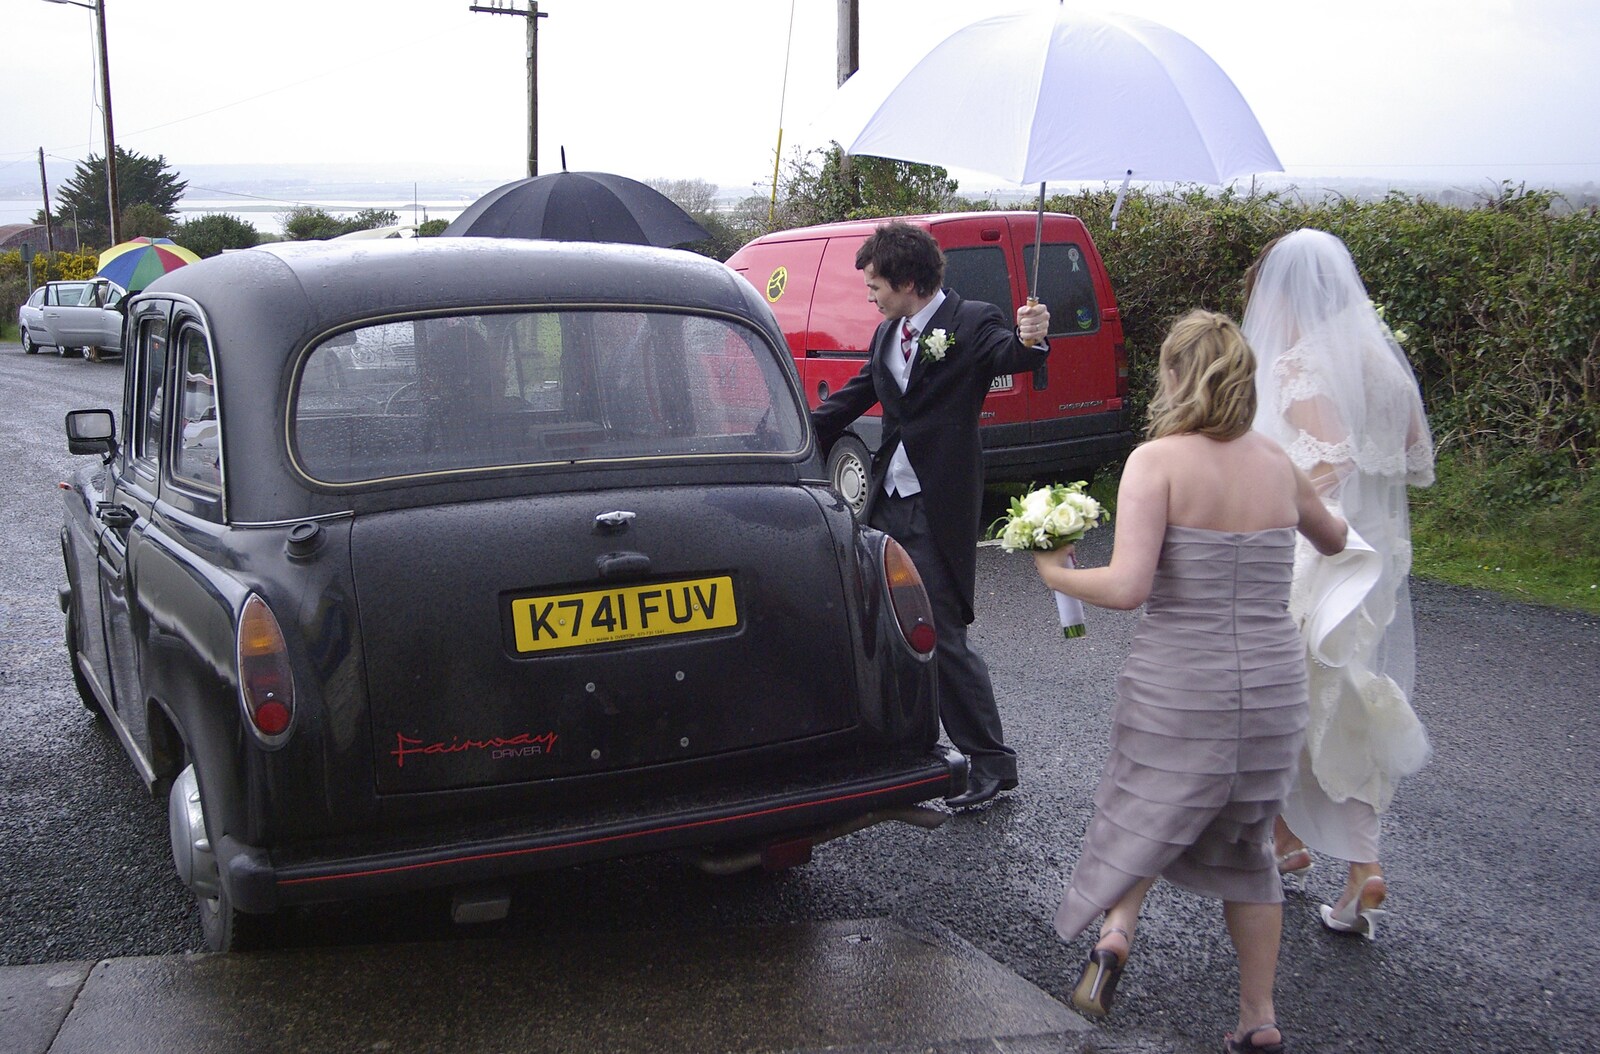 Paul and Jenny's Wedding, Tralee, County Kerry, Ireland - 3rd May 2008: The couple get into a British taxi